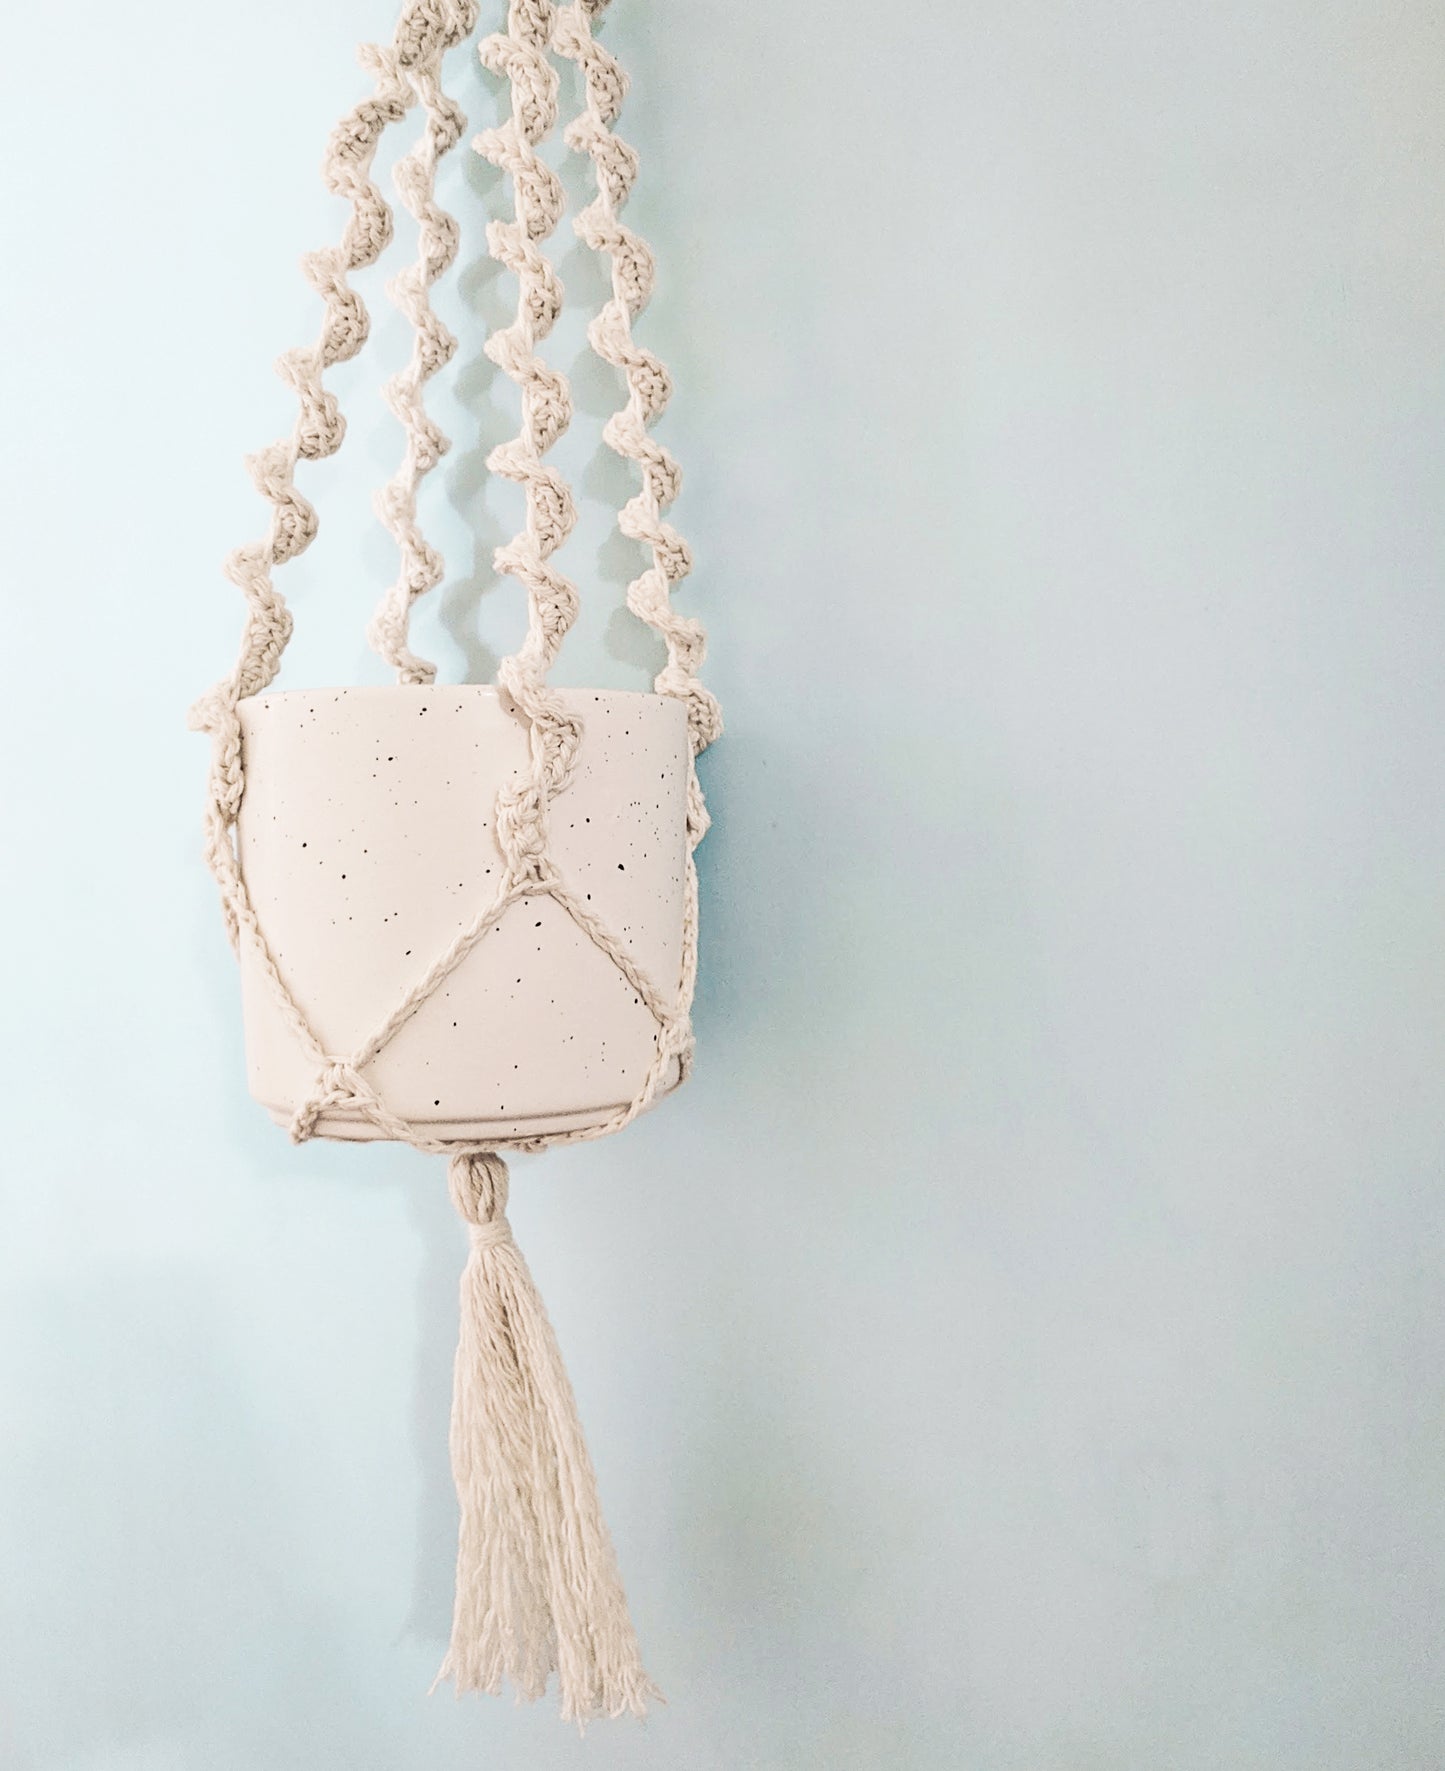 Crochet Pattern: Twisted Faux Macrame Hanging Air Planter